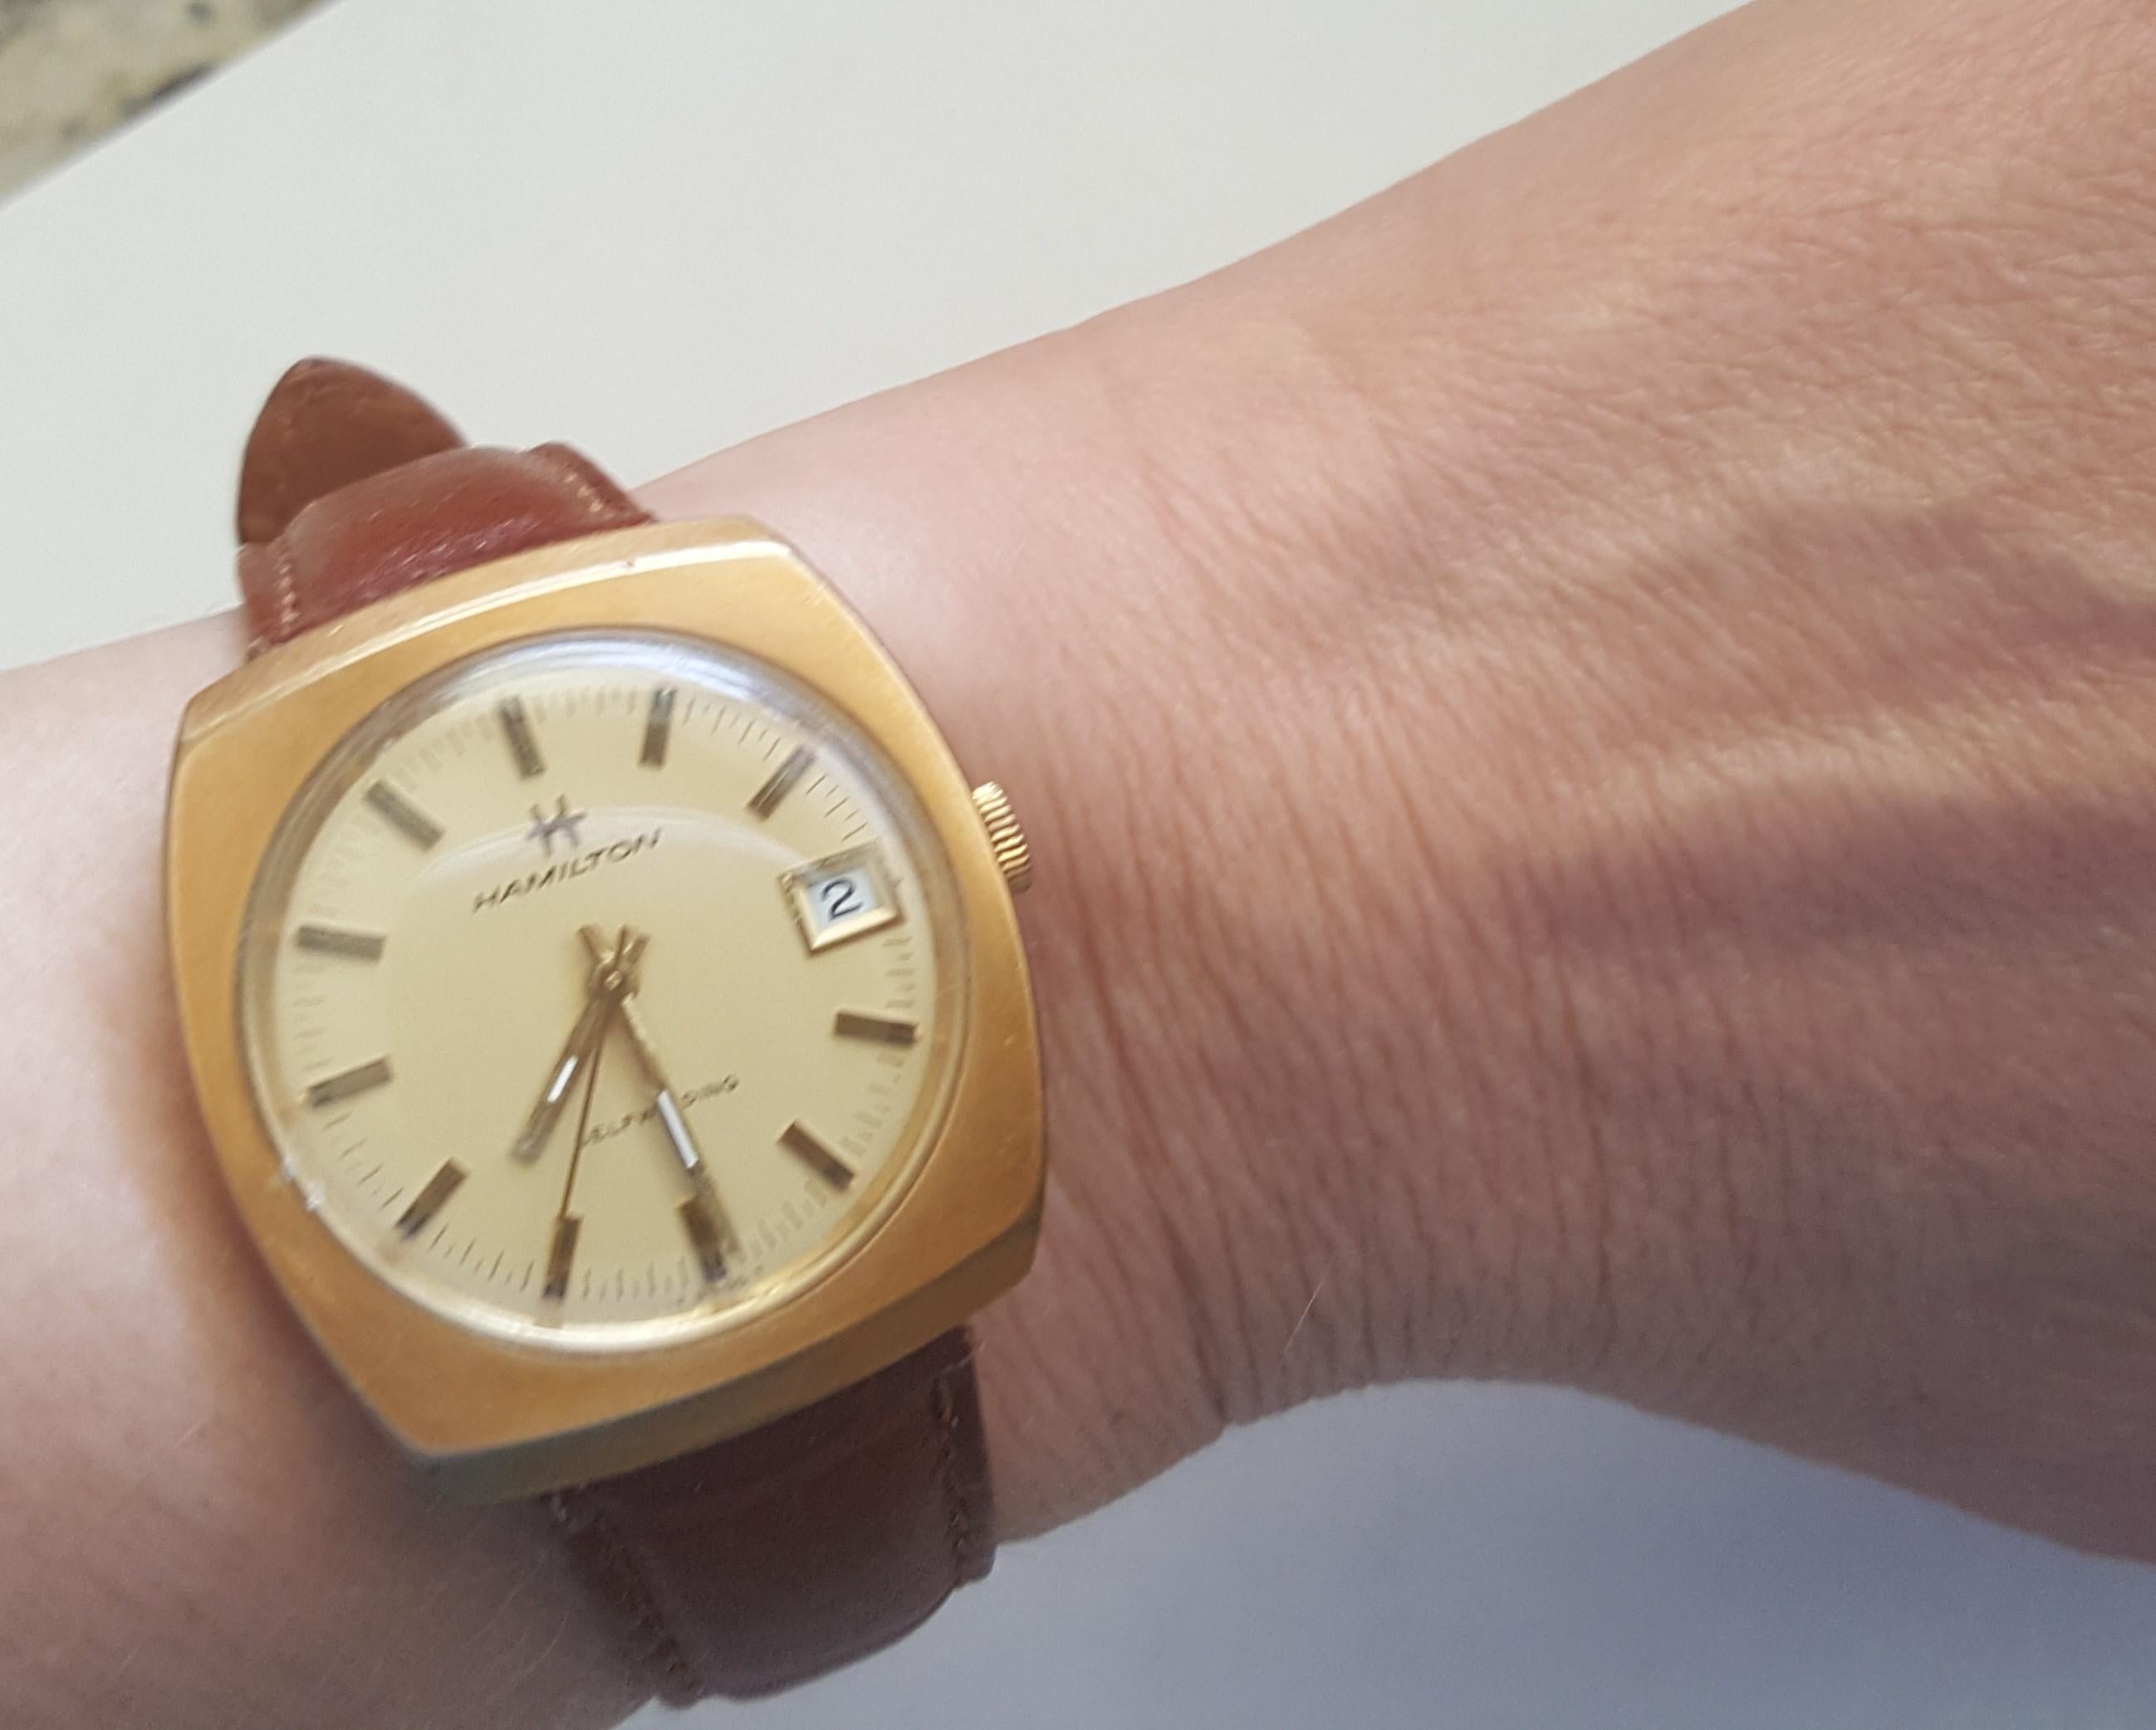 Vintage Hamilton Watch 1960's 14kt gold filled self winding swiss leather band. The diameter is 34mm by 38 mm. Very good condition. The crystal is 29 mm in diameter and the thickness of the dial is 11mm. The total length of the watch and the band is